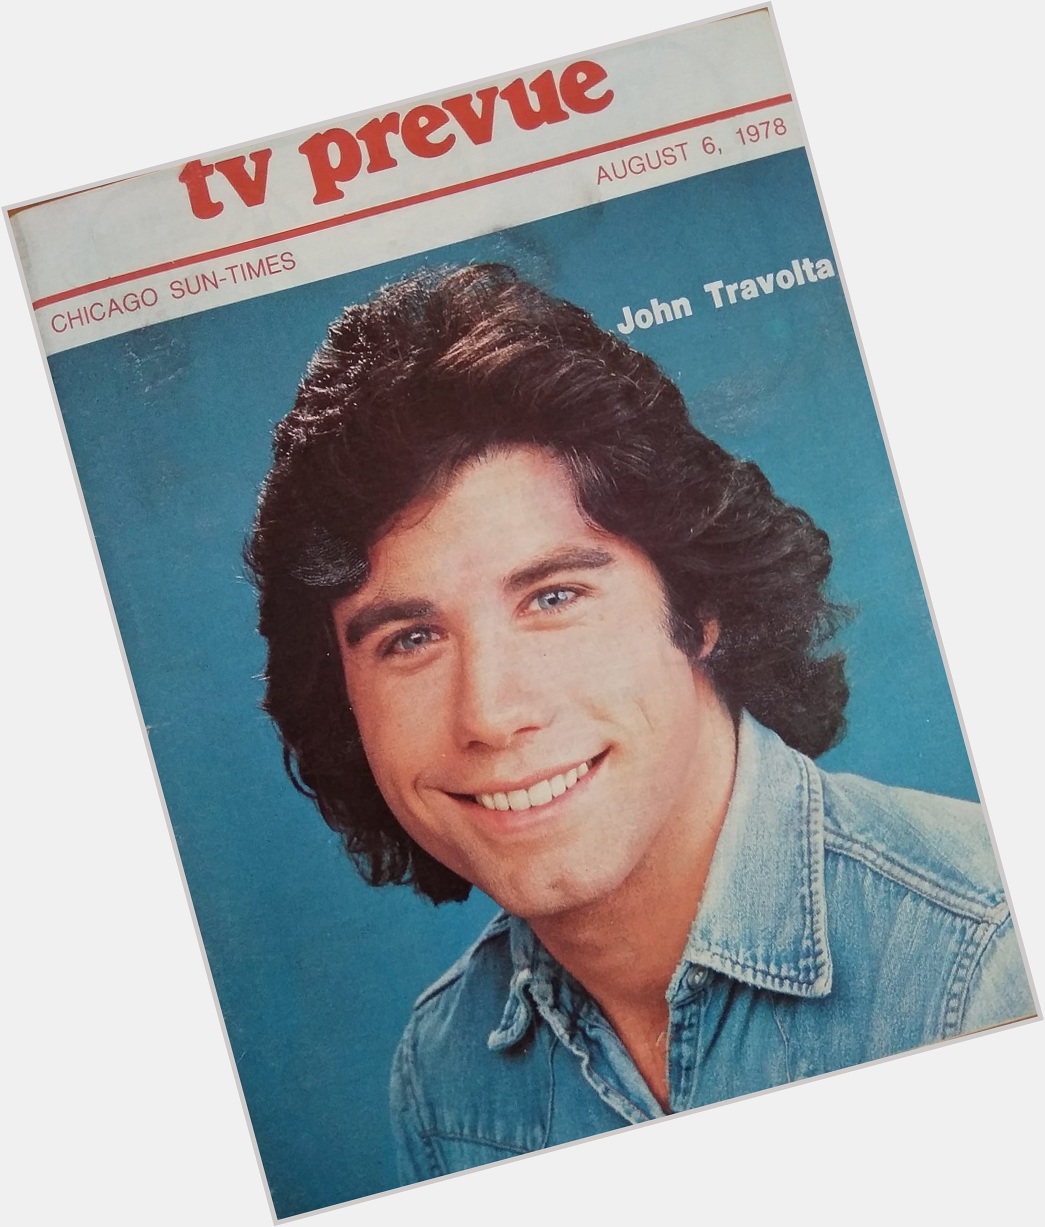 Happy Birthday to John Travolta, born on this day in 1954
Chicago Sun-Times TV Prevue.  August 6-12, 1978 